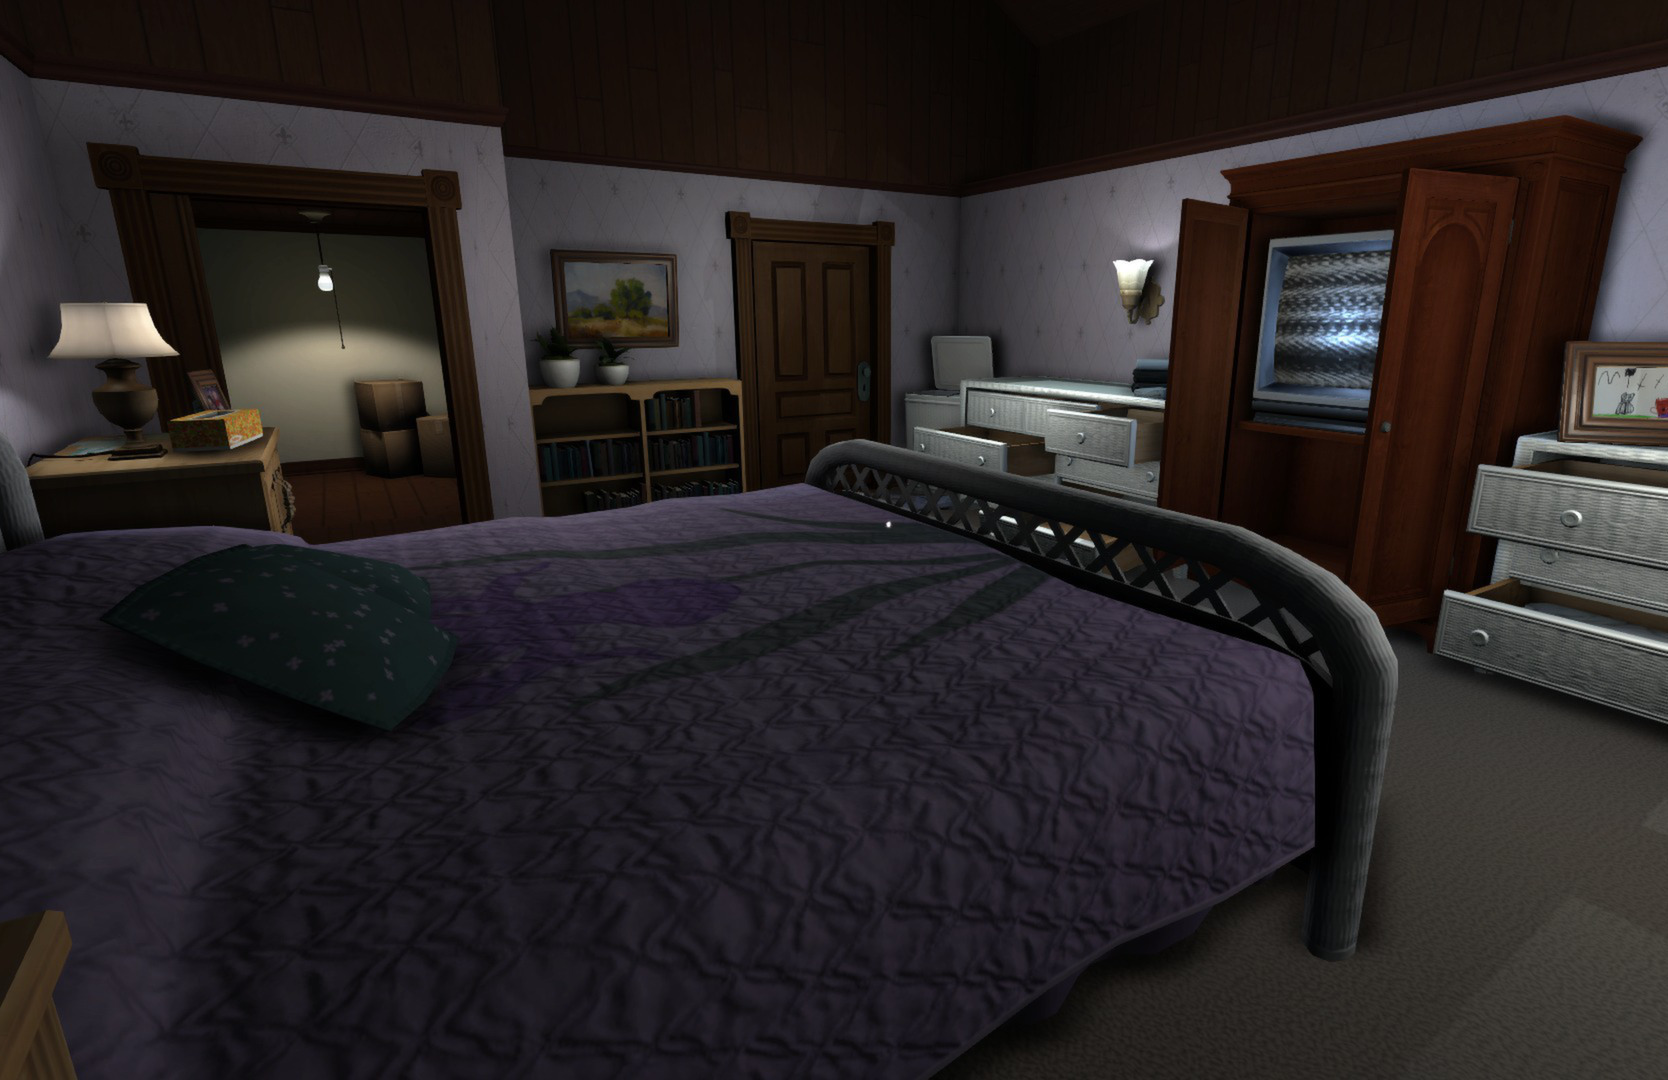 gone home mac free download